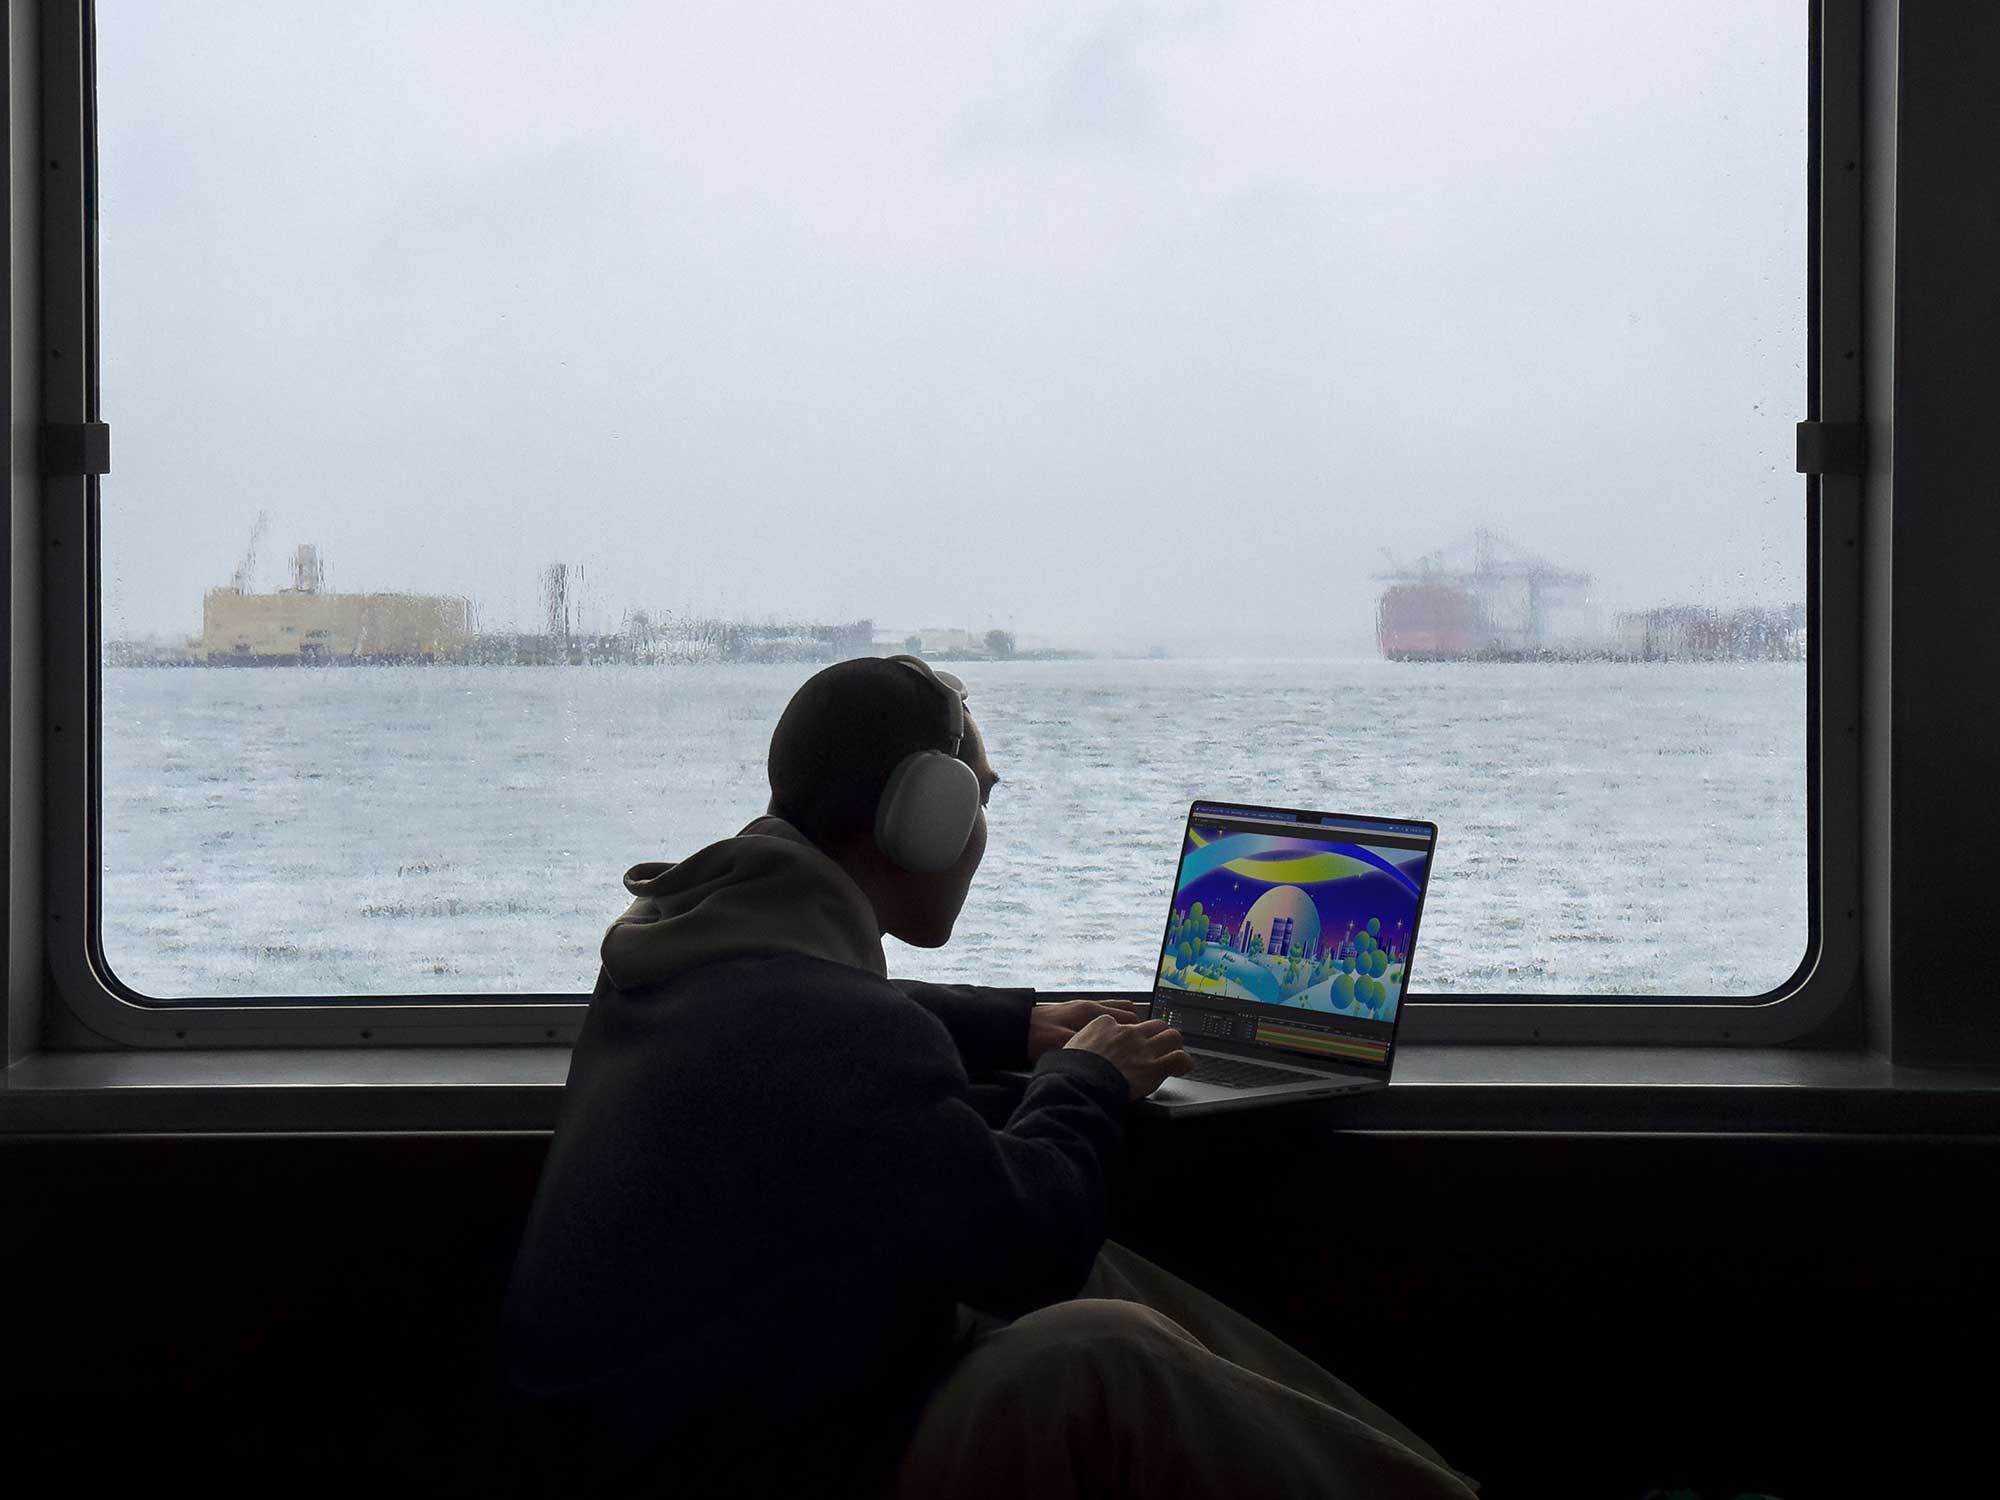 A man uses a MacBook Pro on a boat next to a window on a rainy day